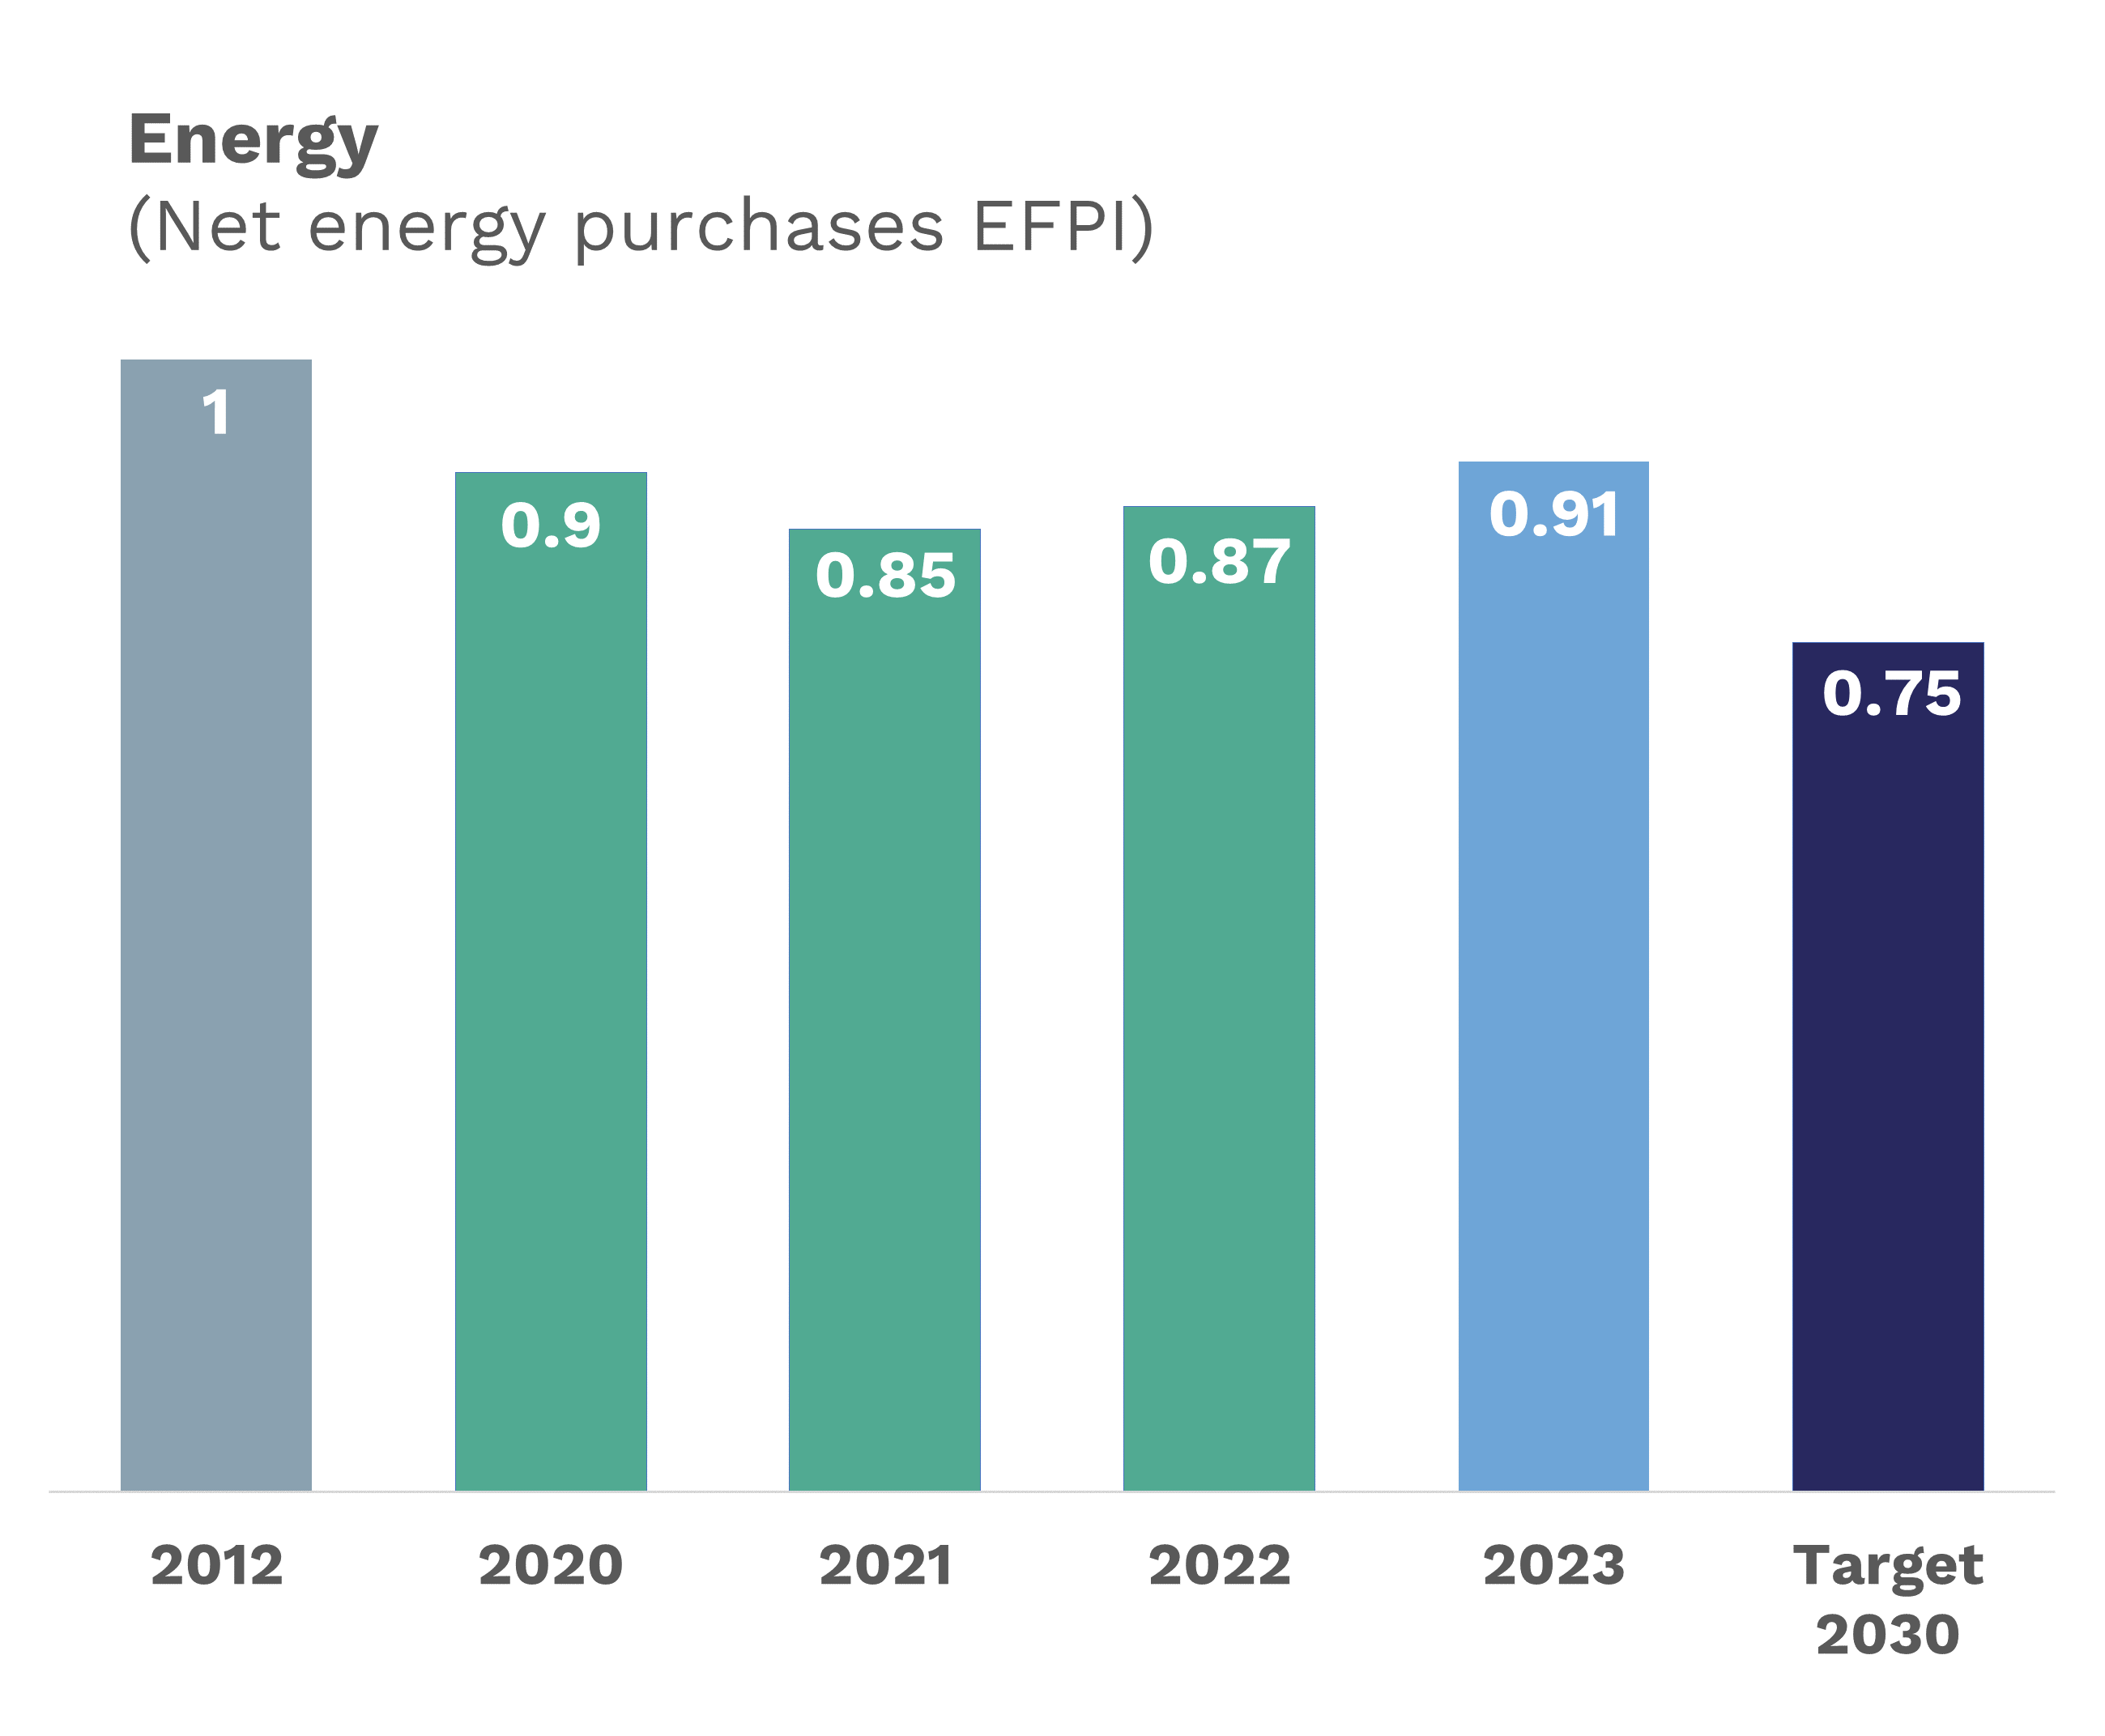 In 2012, the EFPI for net energy purchase was 1 ; 0.90 in 2020 ; 0.85 in 2021 ; 0.87 in 2022 ; 0.91 in 2023, and a goal of 0.75 in 2030